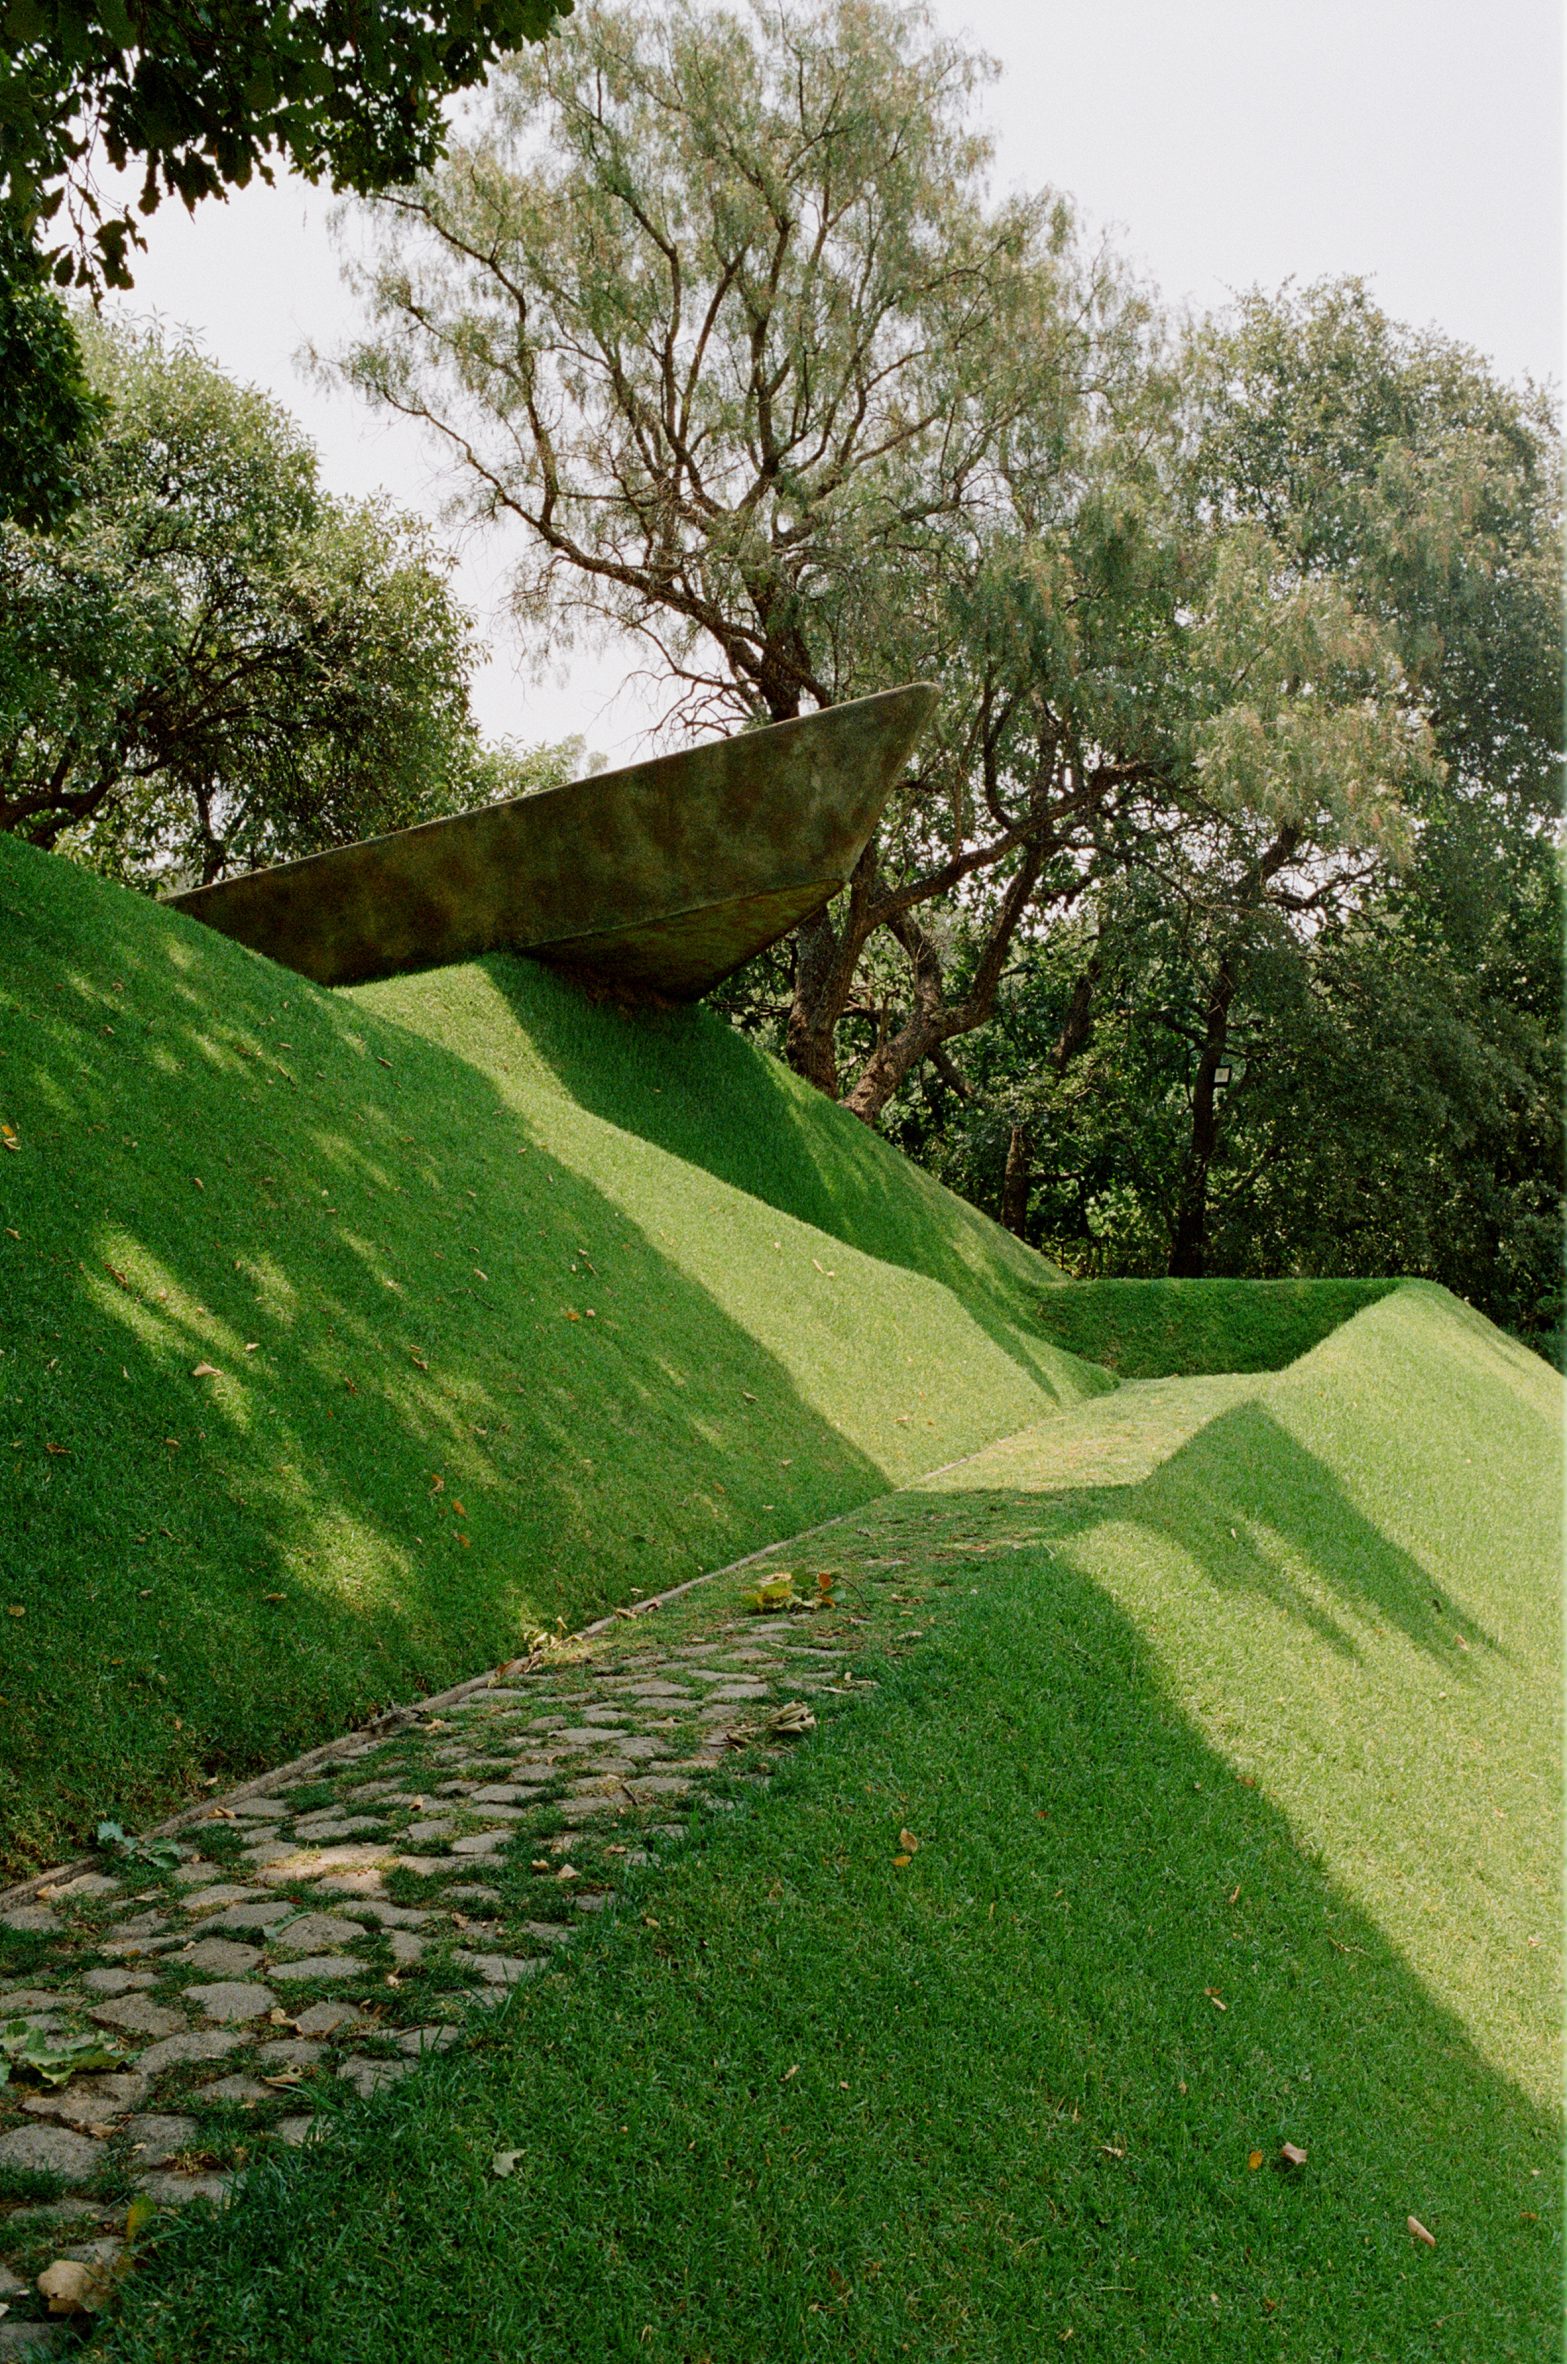 Sloped grassy hill with walkway